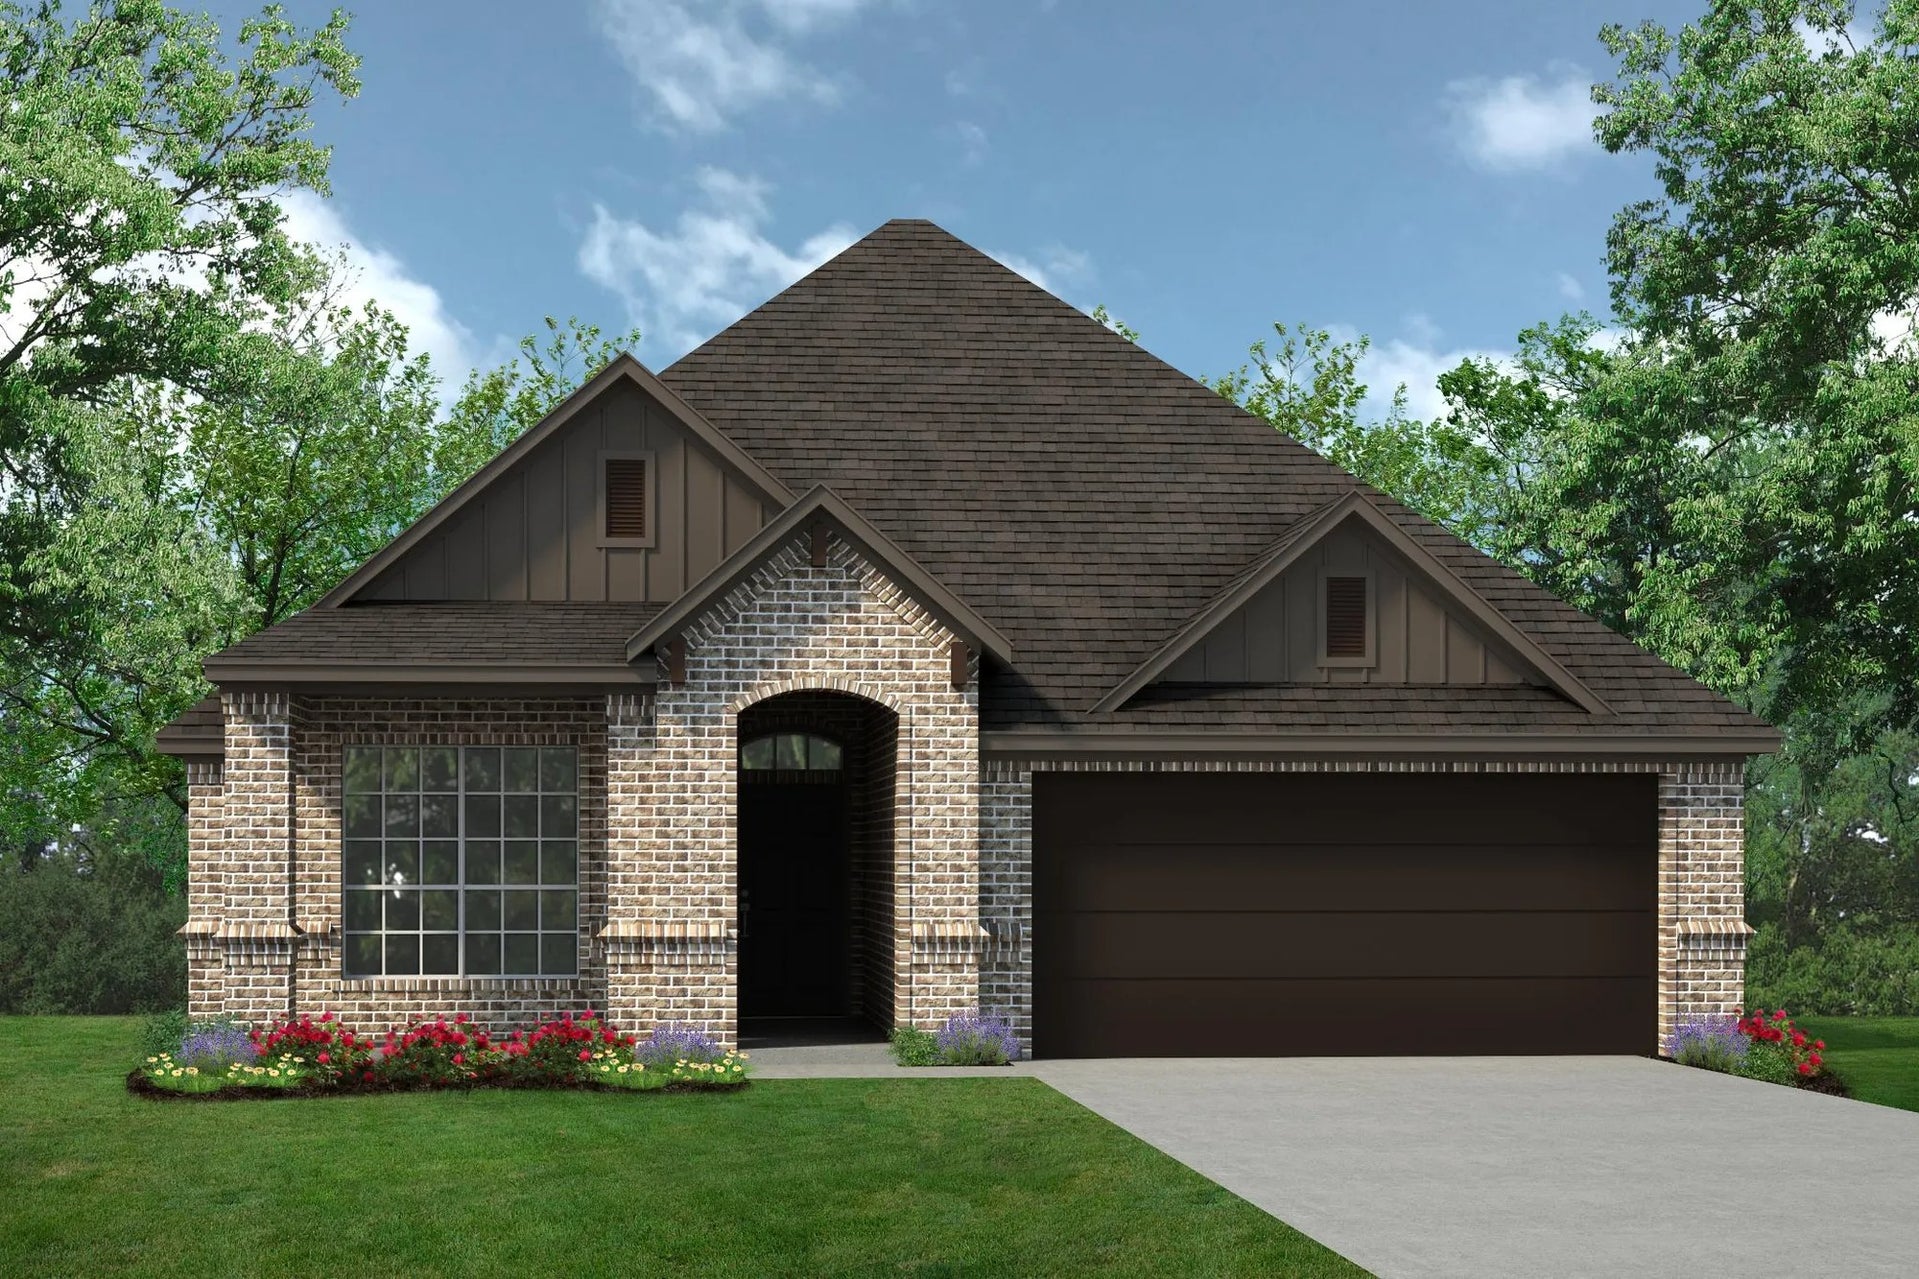 1638 C. 3br New Home in Fort Worth, TX